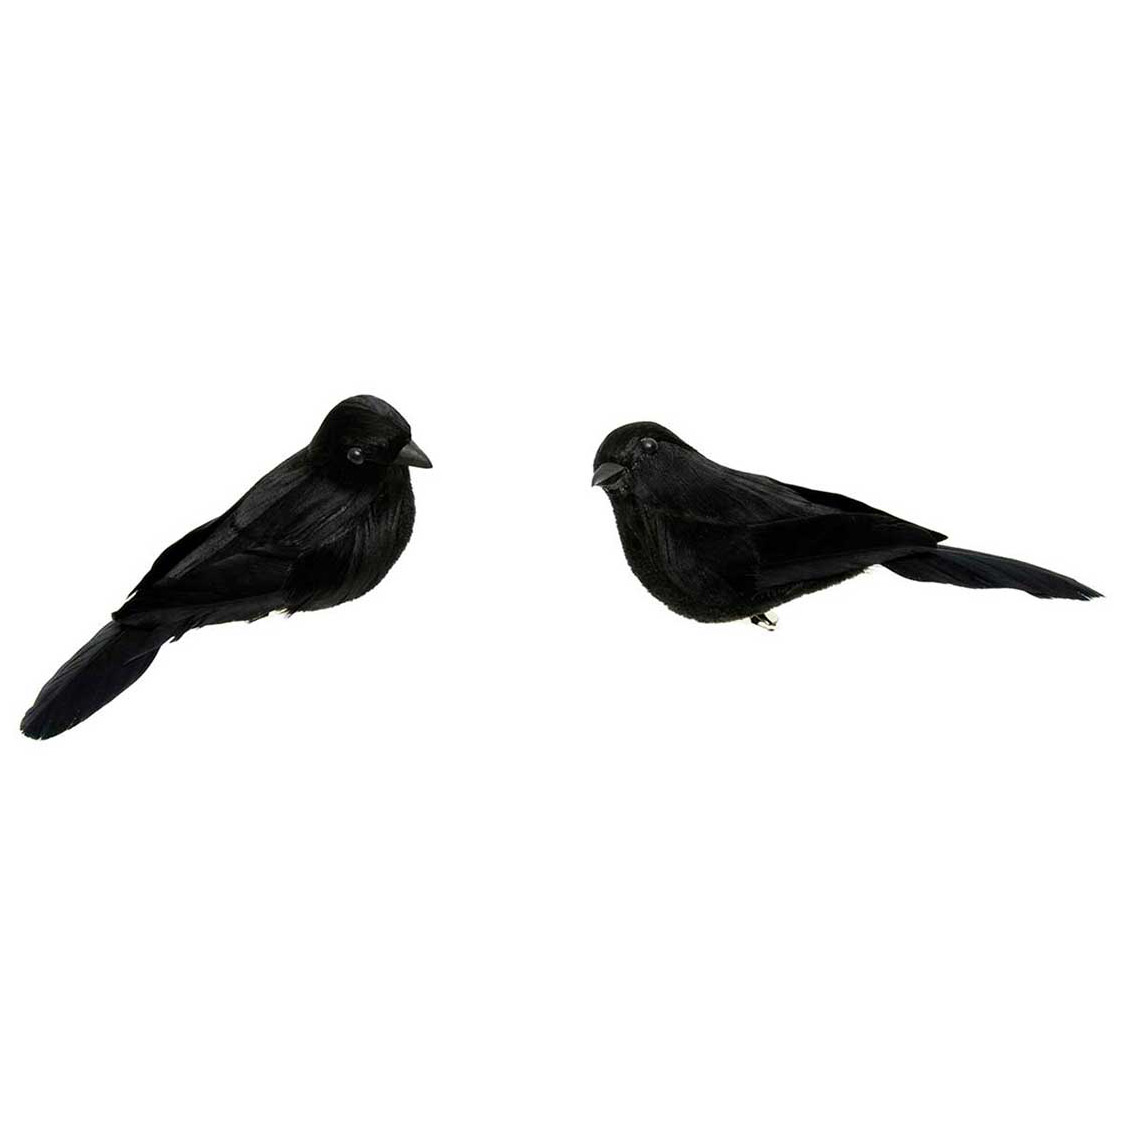 CROW 2 ASSORTED SMALL 1.75IN X 4.5IN BLACK WITH METAL CLIP